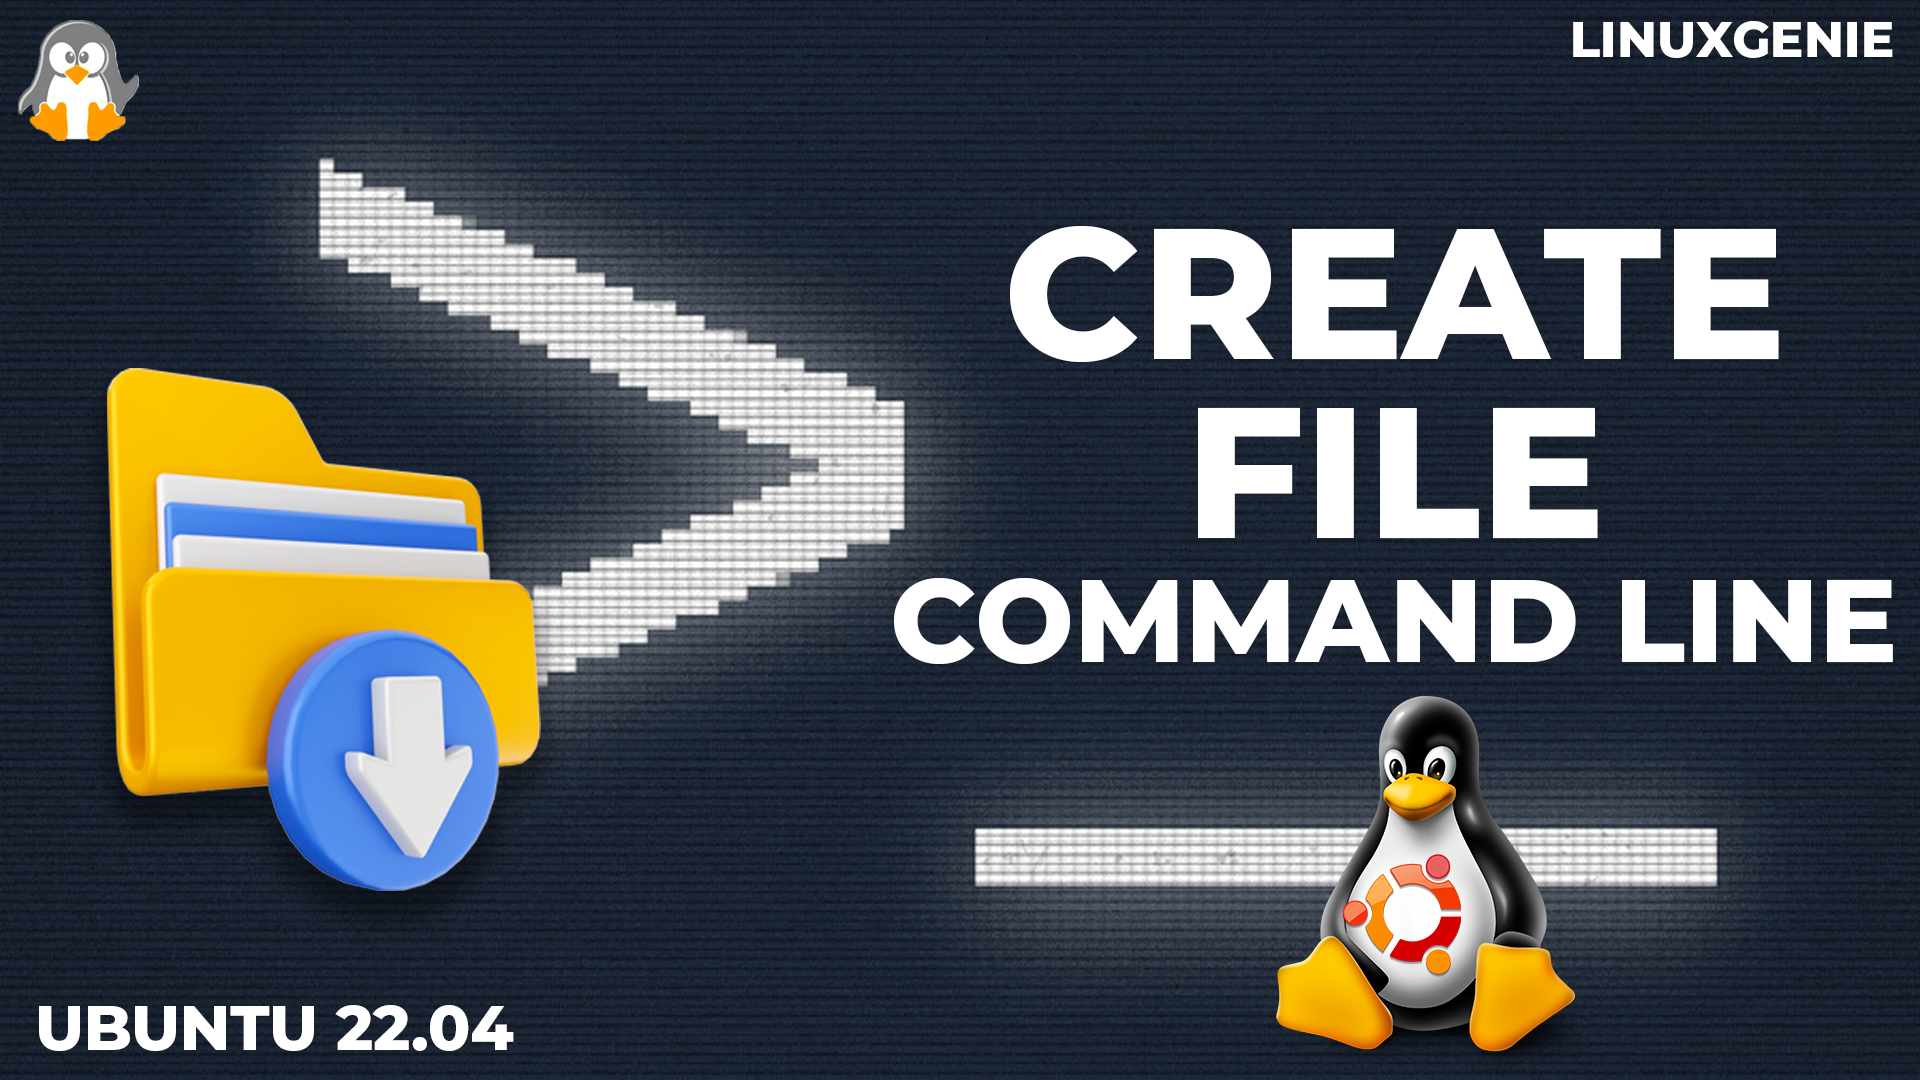 How to Create a File in Linux/Ubuntu from the Command Line?